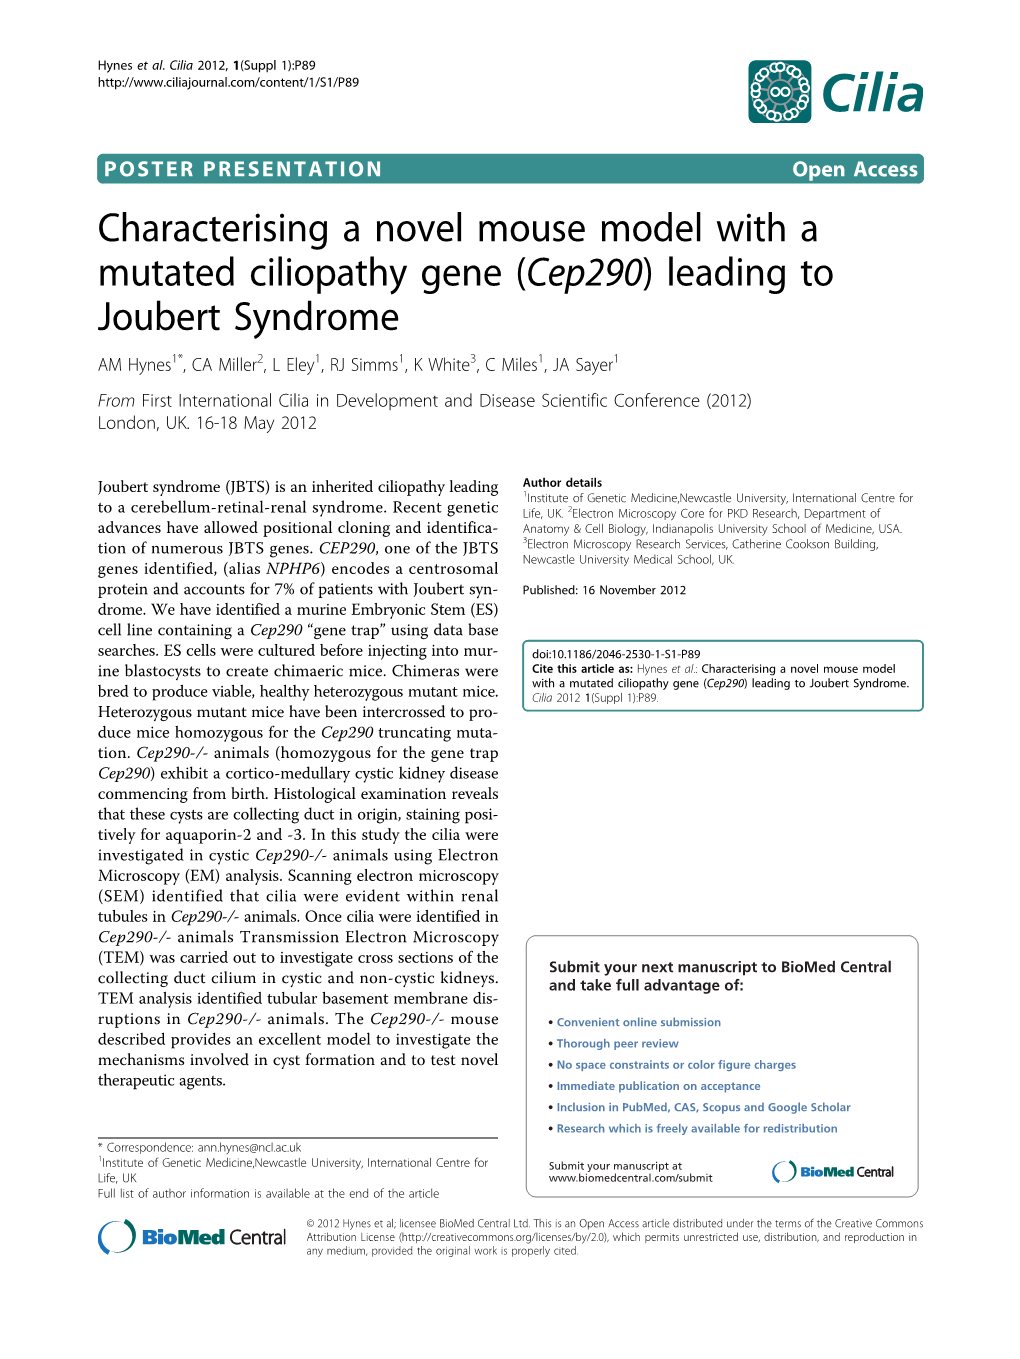 Characterising a Novel Mouse Model with a Mutated Ciliopathy Gene (Cep290) Leading to Joubert Syndrome